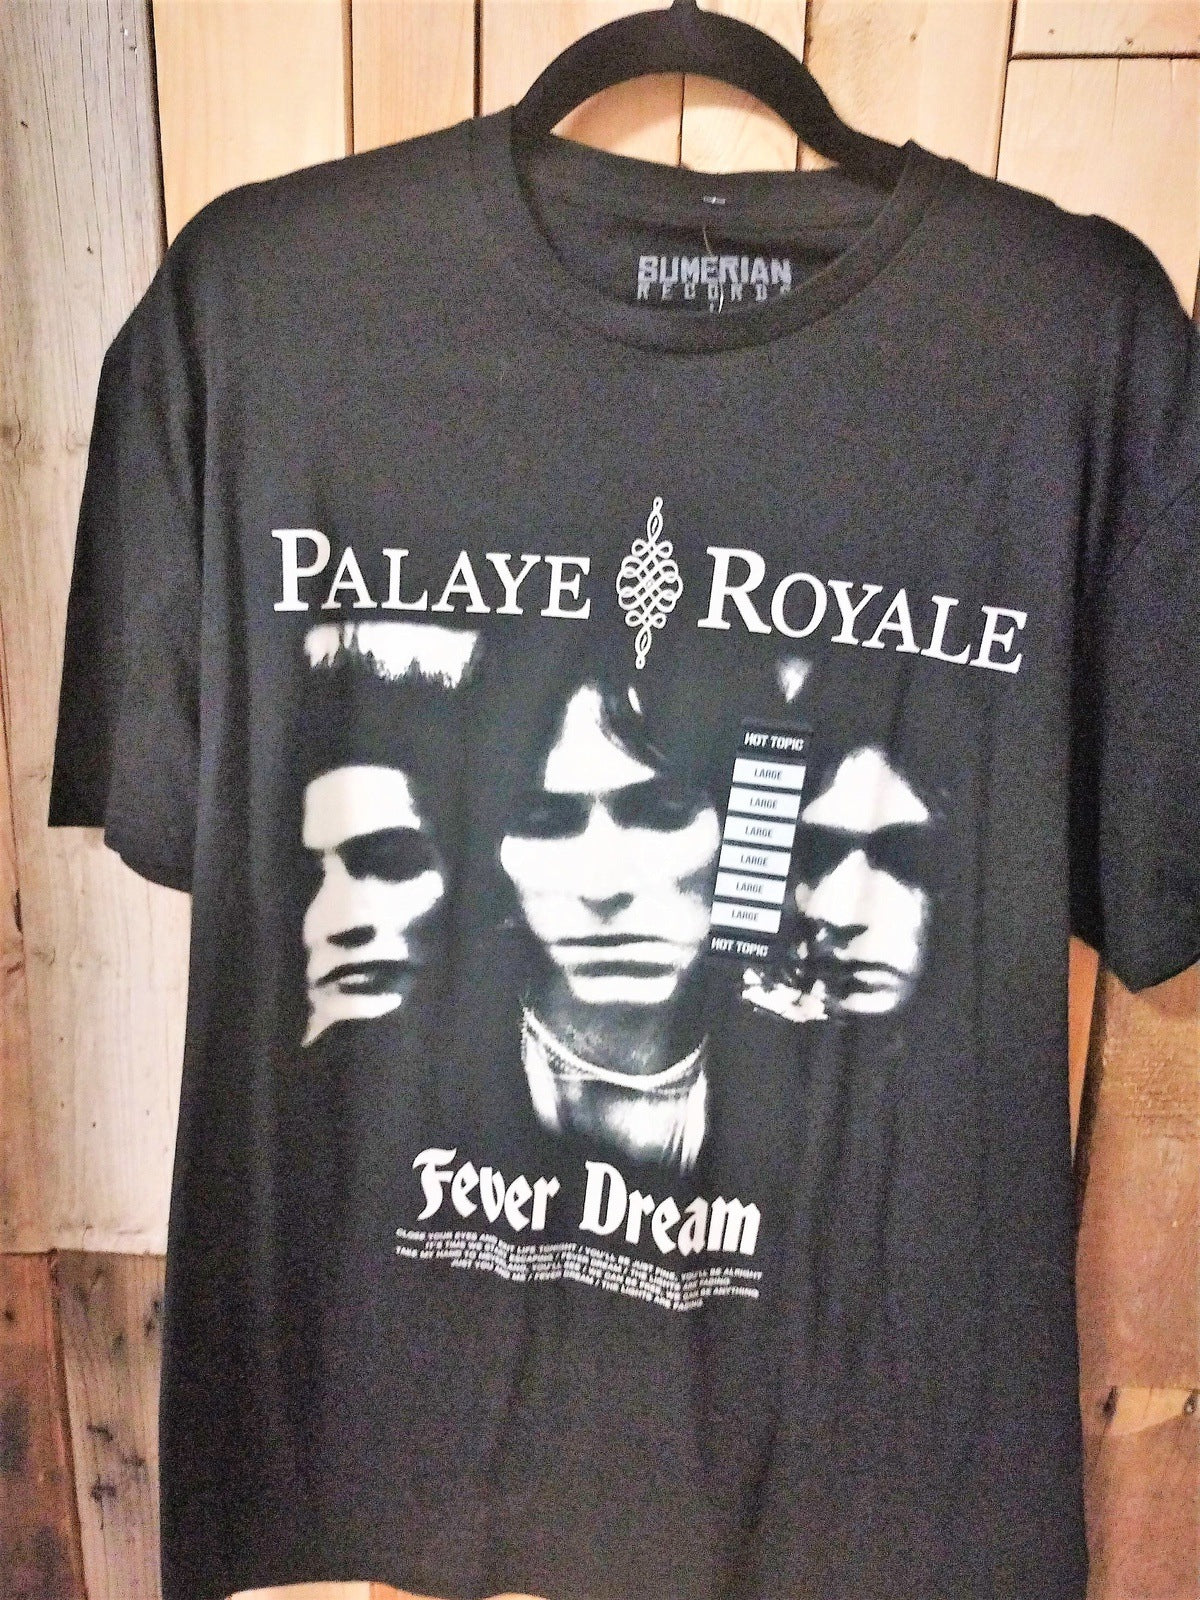 Palaye Royale Fever Dream Tee Shirt Size Large new with Tags